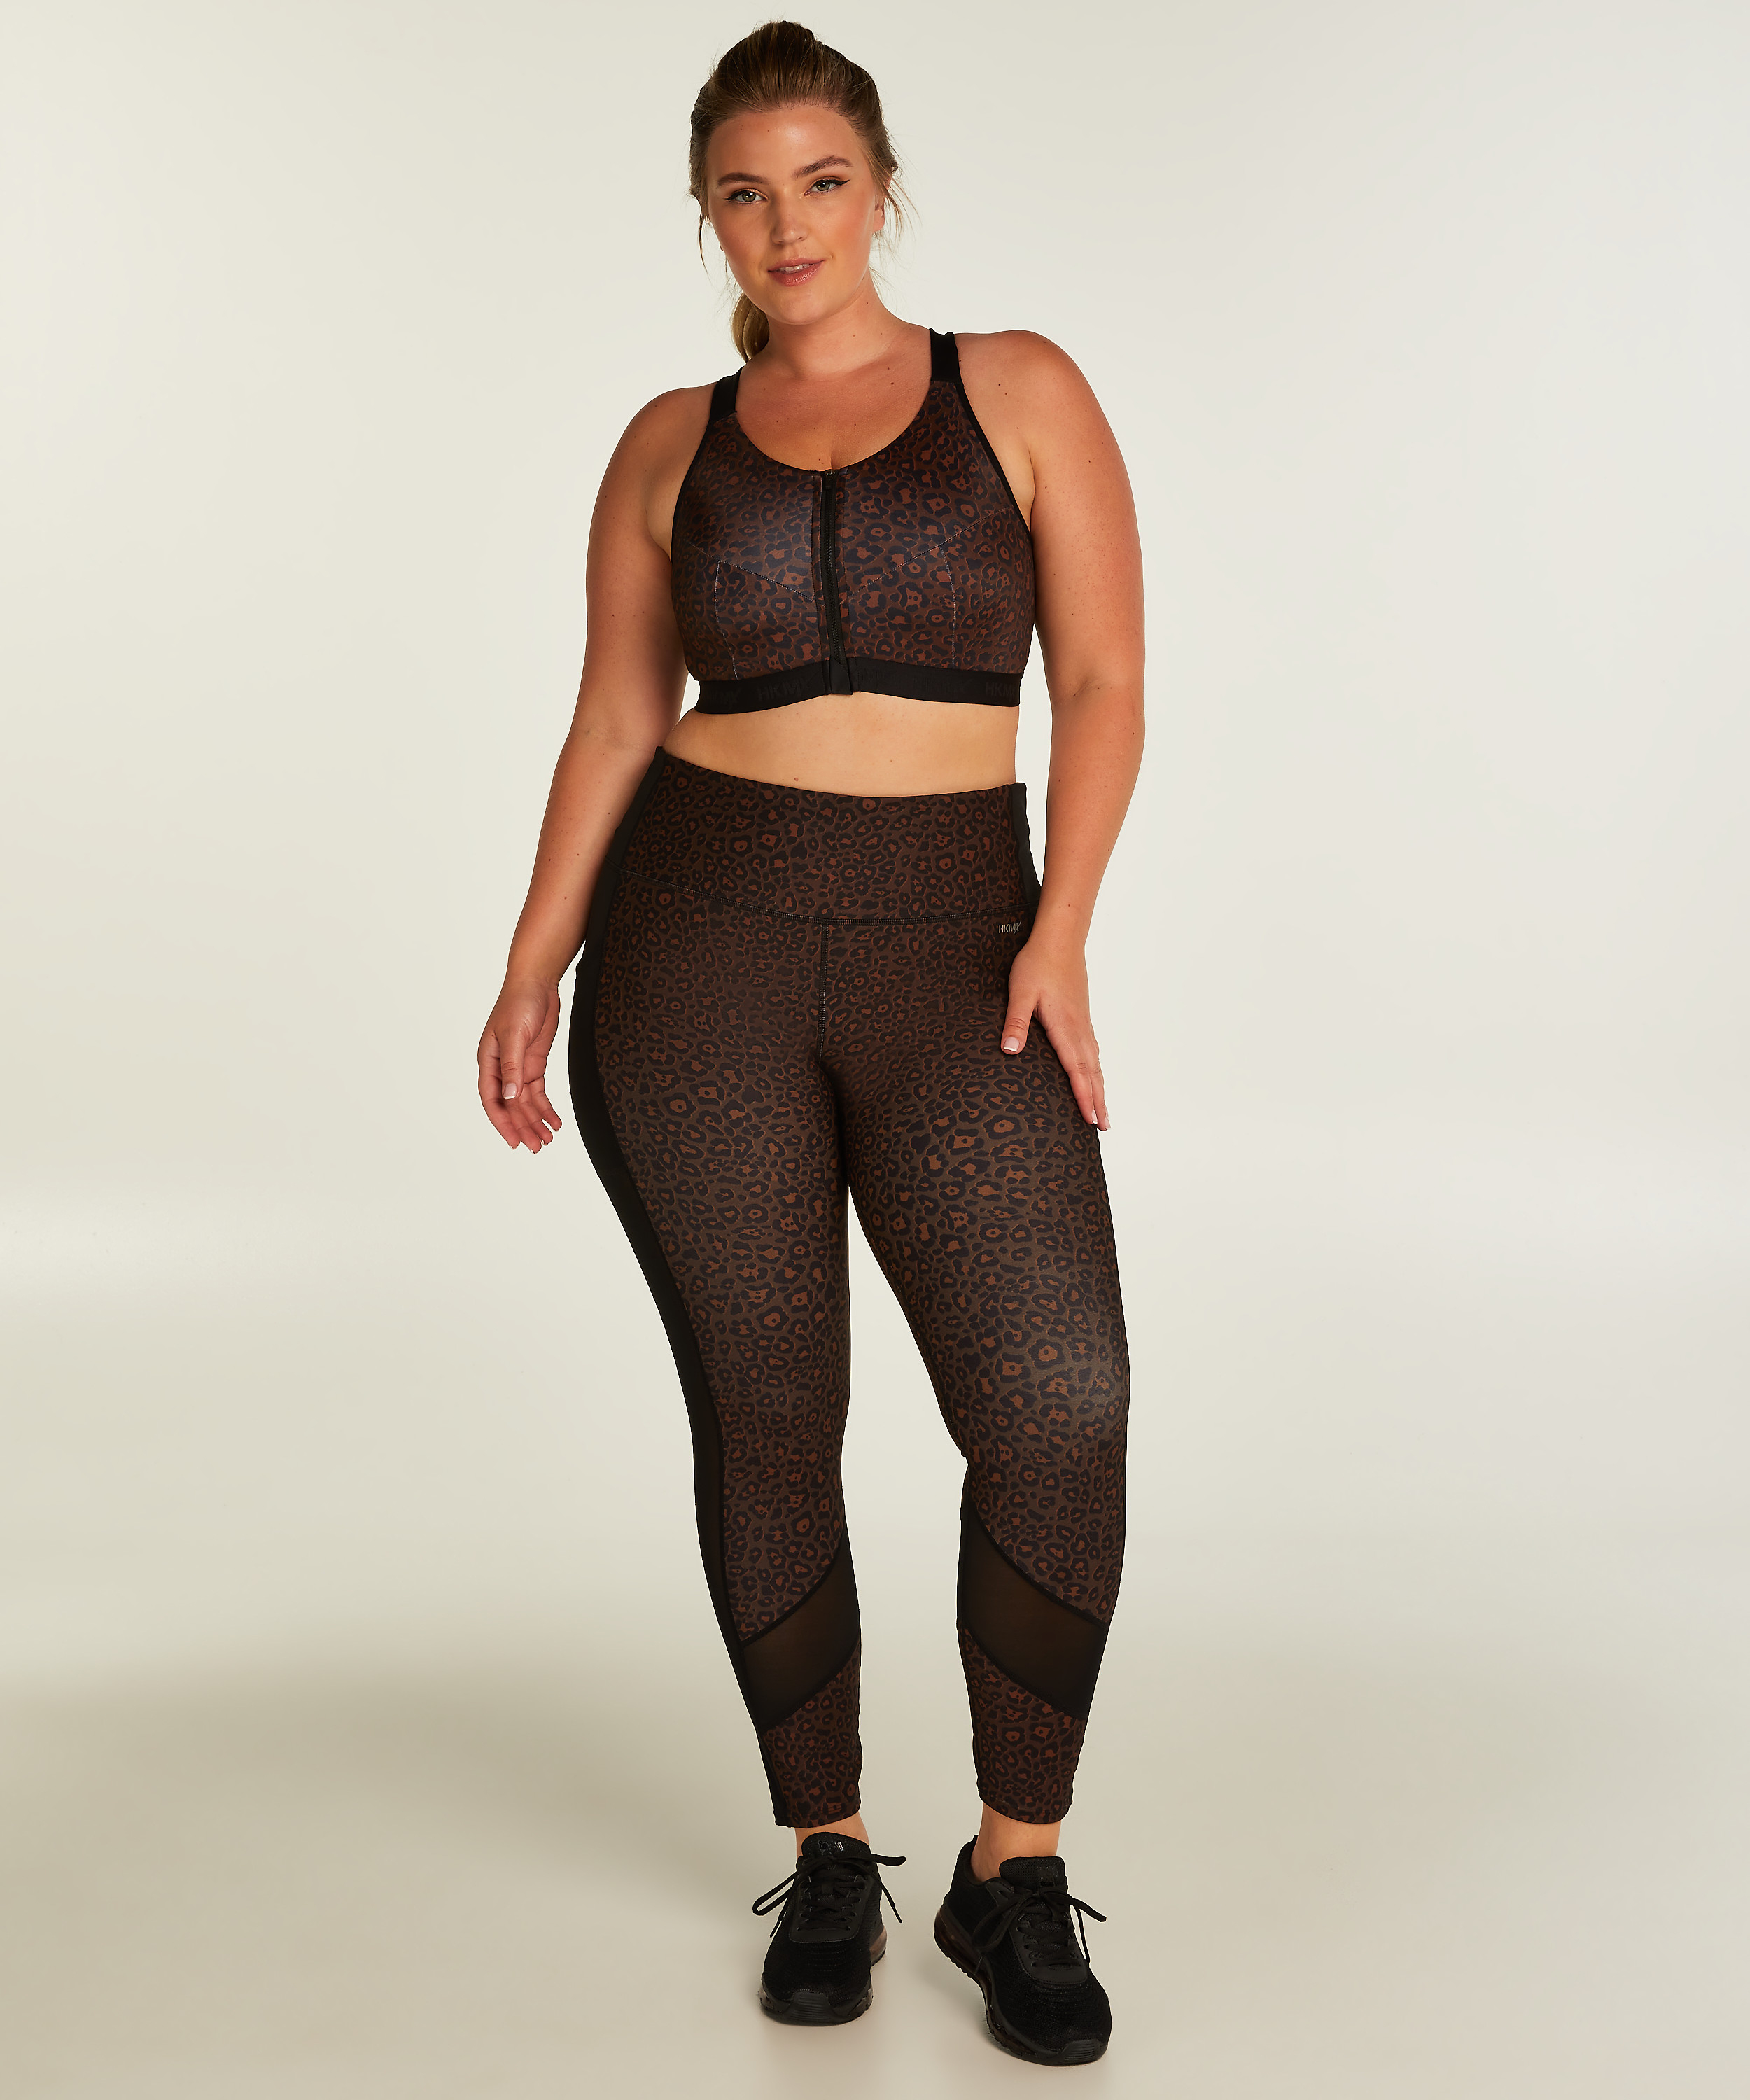 HKMX Oh My Squat High Waisted Leggings, Brown, main